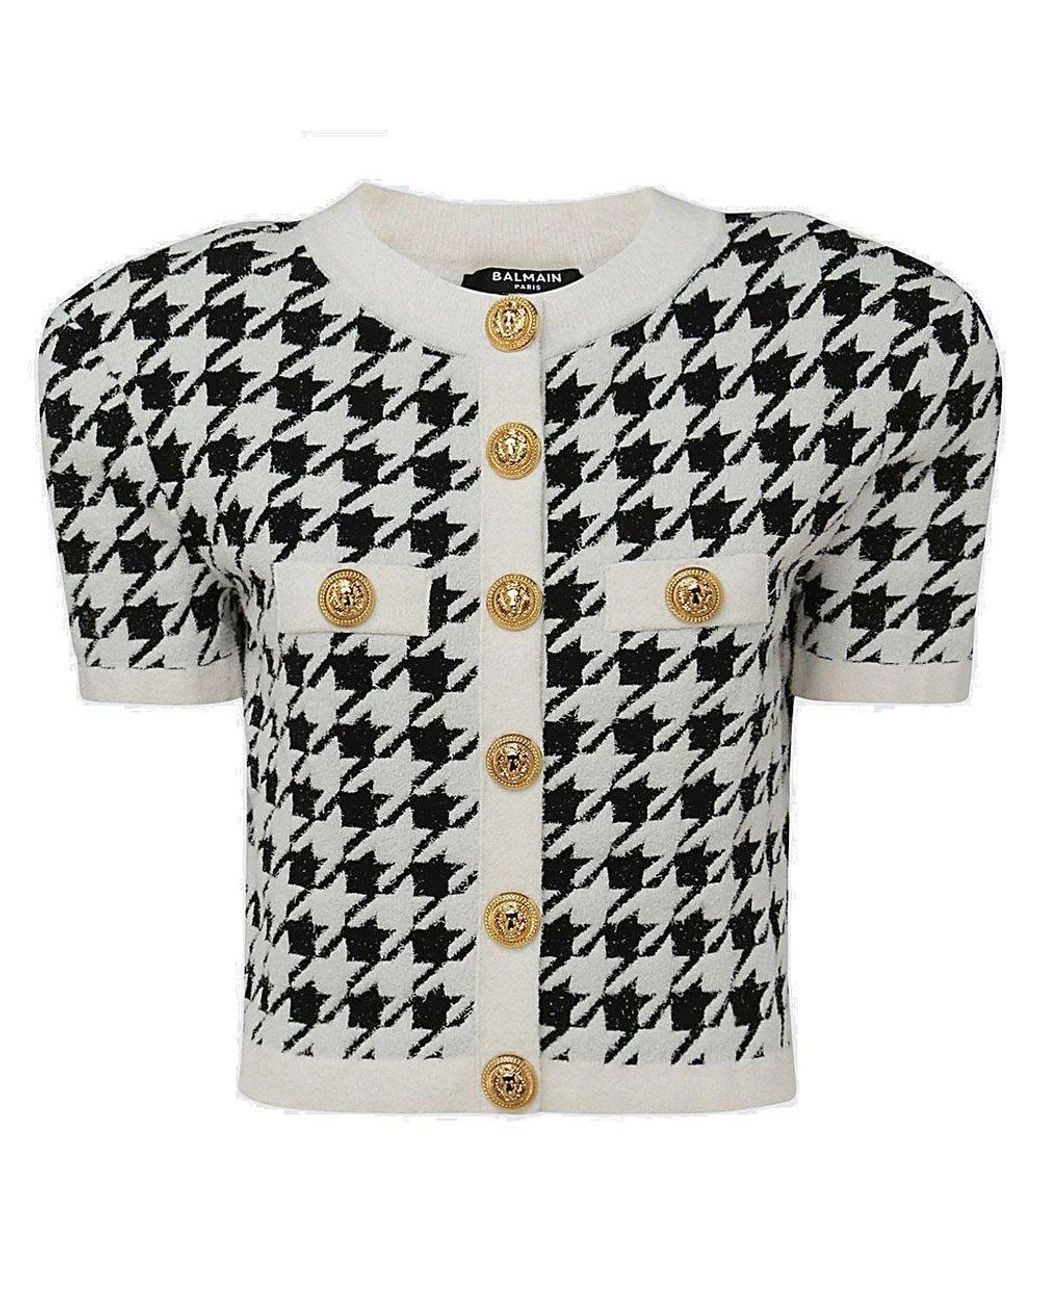 Balmain Houndstooth Printed Cropped Knit Cardigan in Black